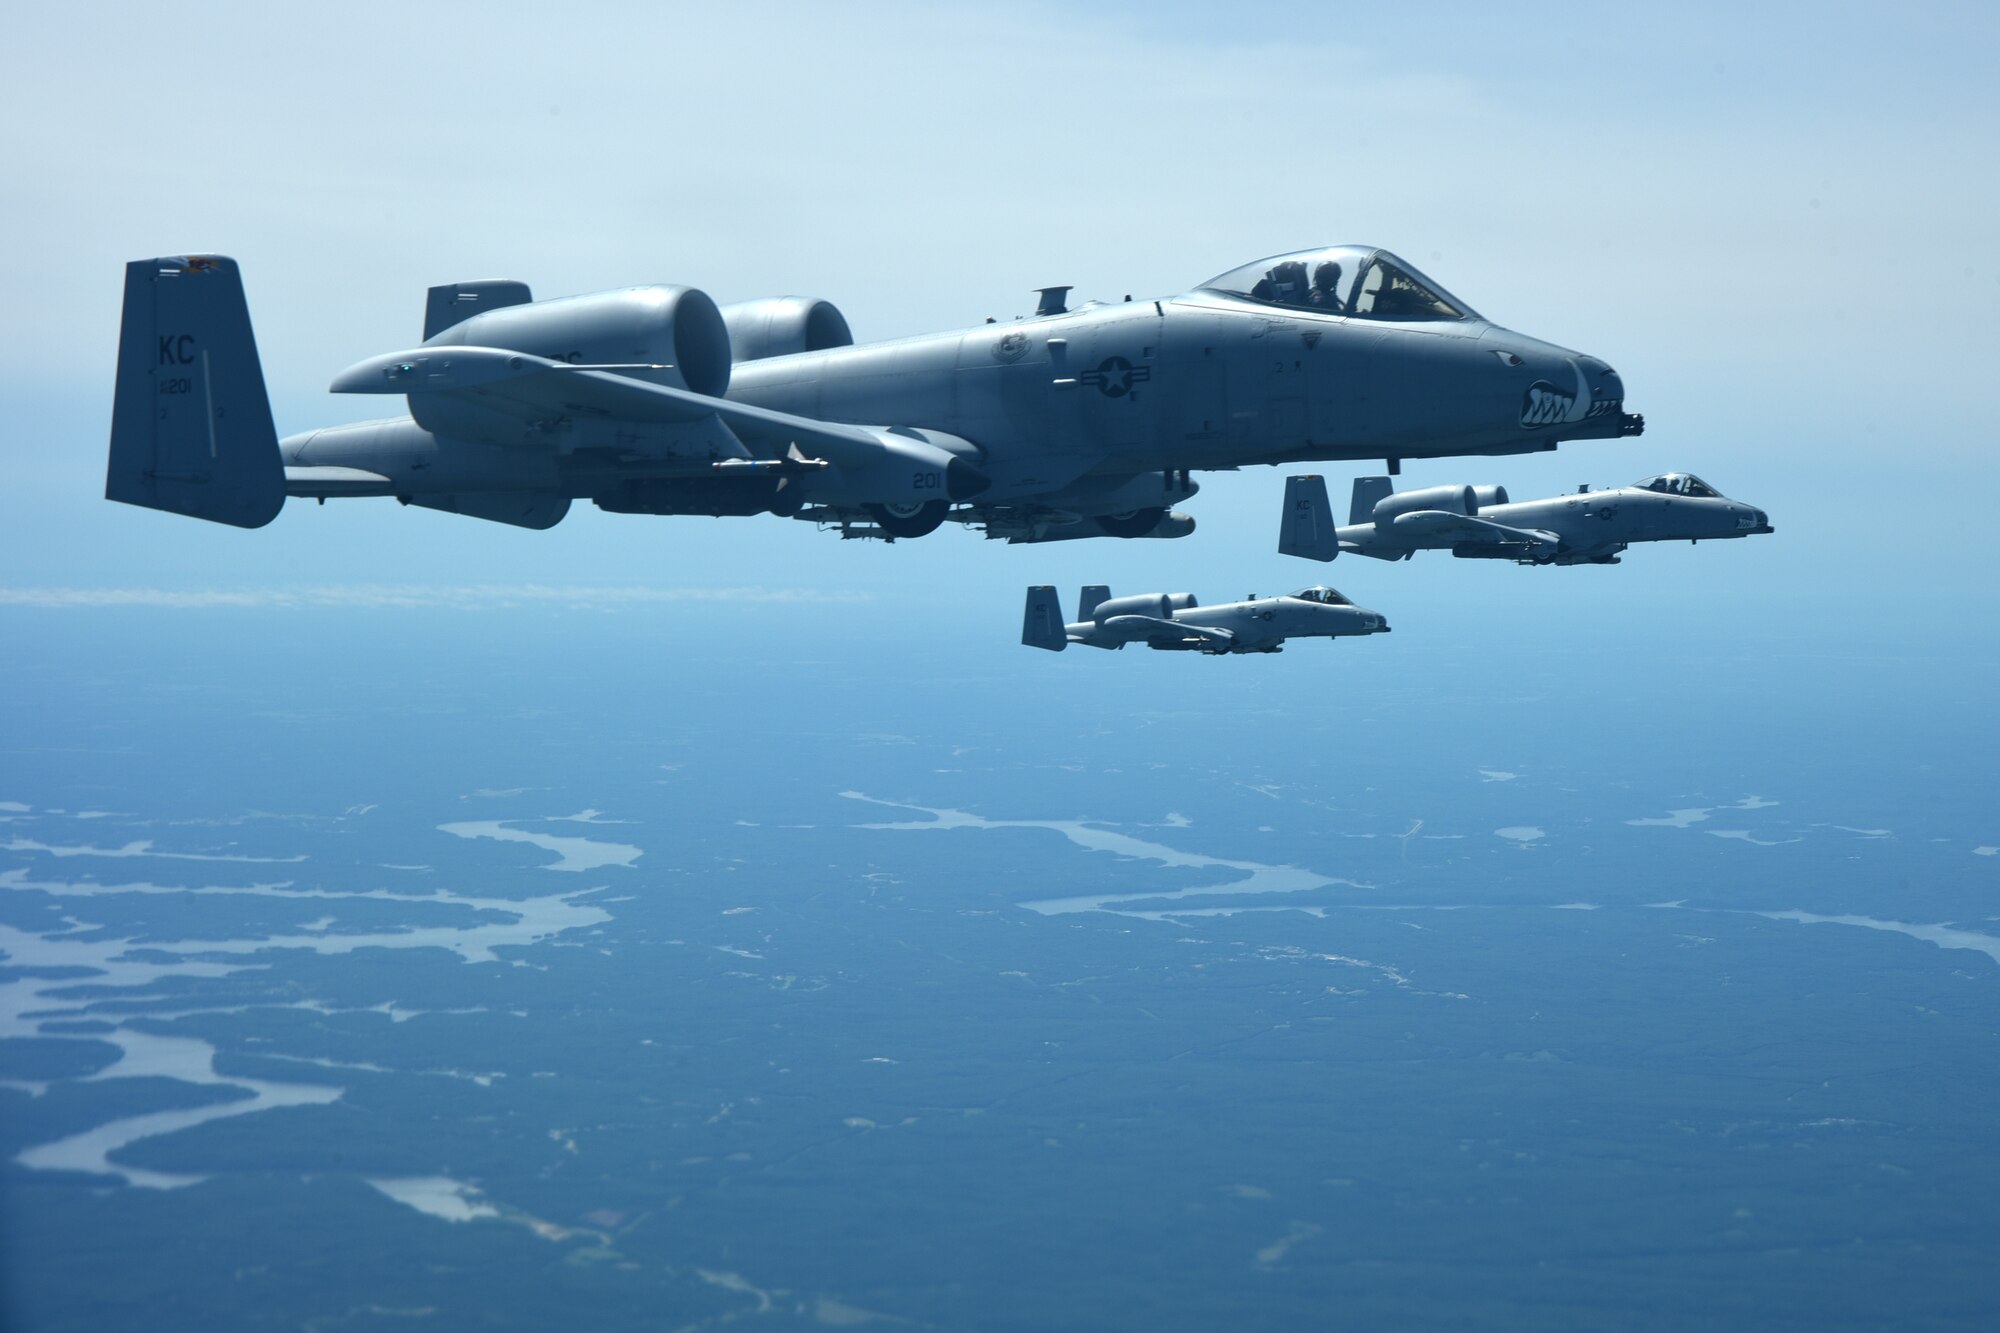 Three A-10 Thunderbolt II’s, assigned to Whiteman Air Force Base, Mo., fly alongside of a KC-135 Stratotanker after refueling, June 30, 2017. A-10’s provide close air support to warfighters on the ground but require refueling mid-flight due to its limited range. (U.S. Air Force photo/Senior Airman Chris Thornbury)